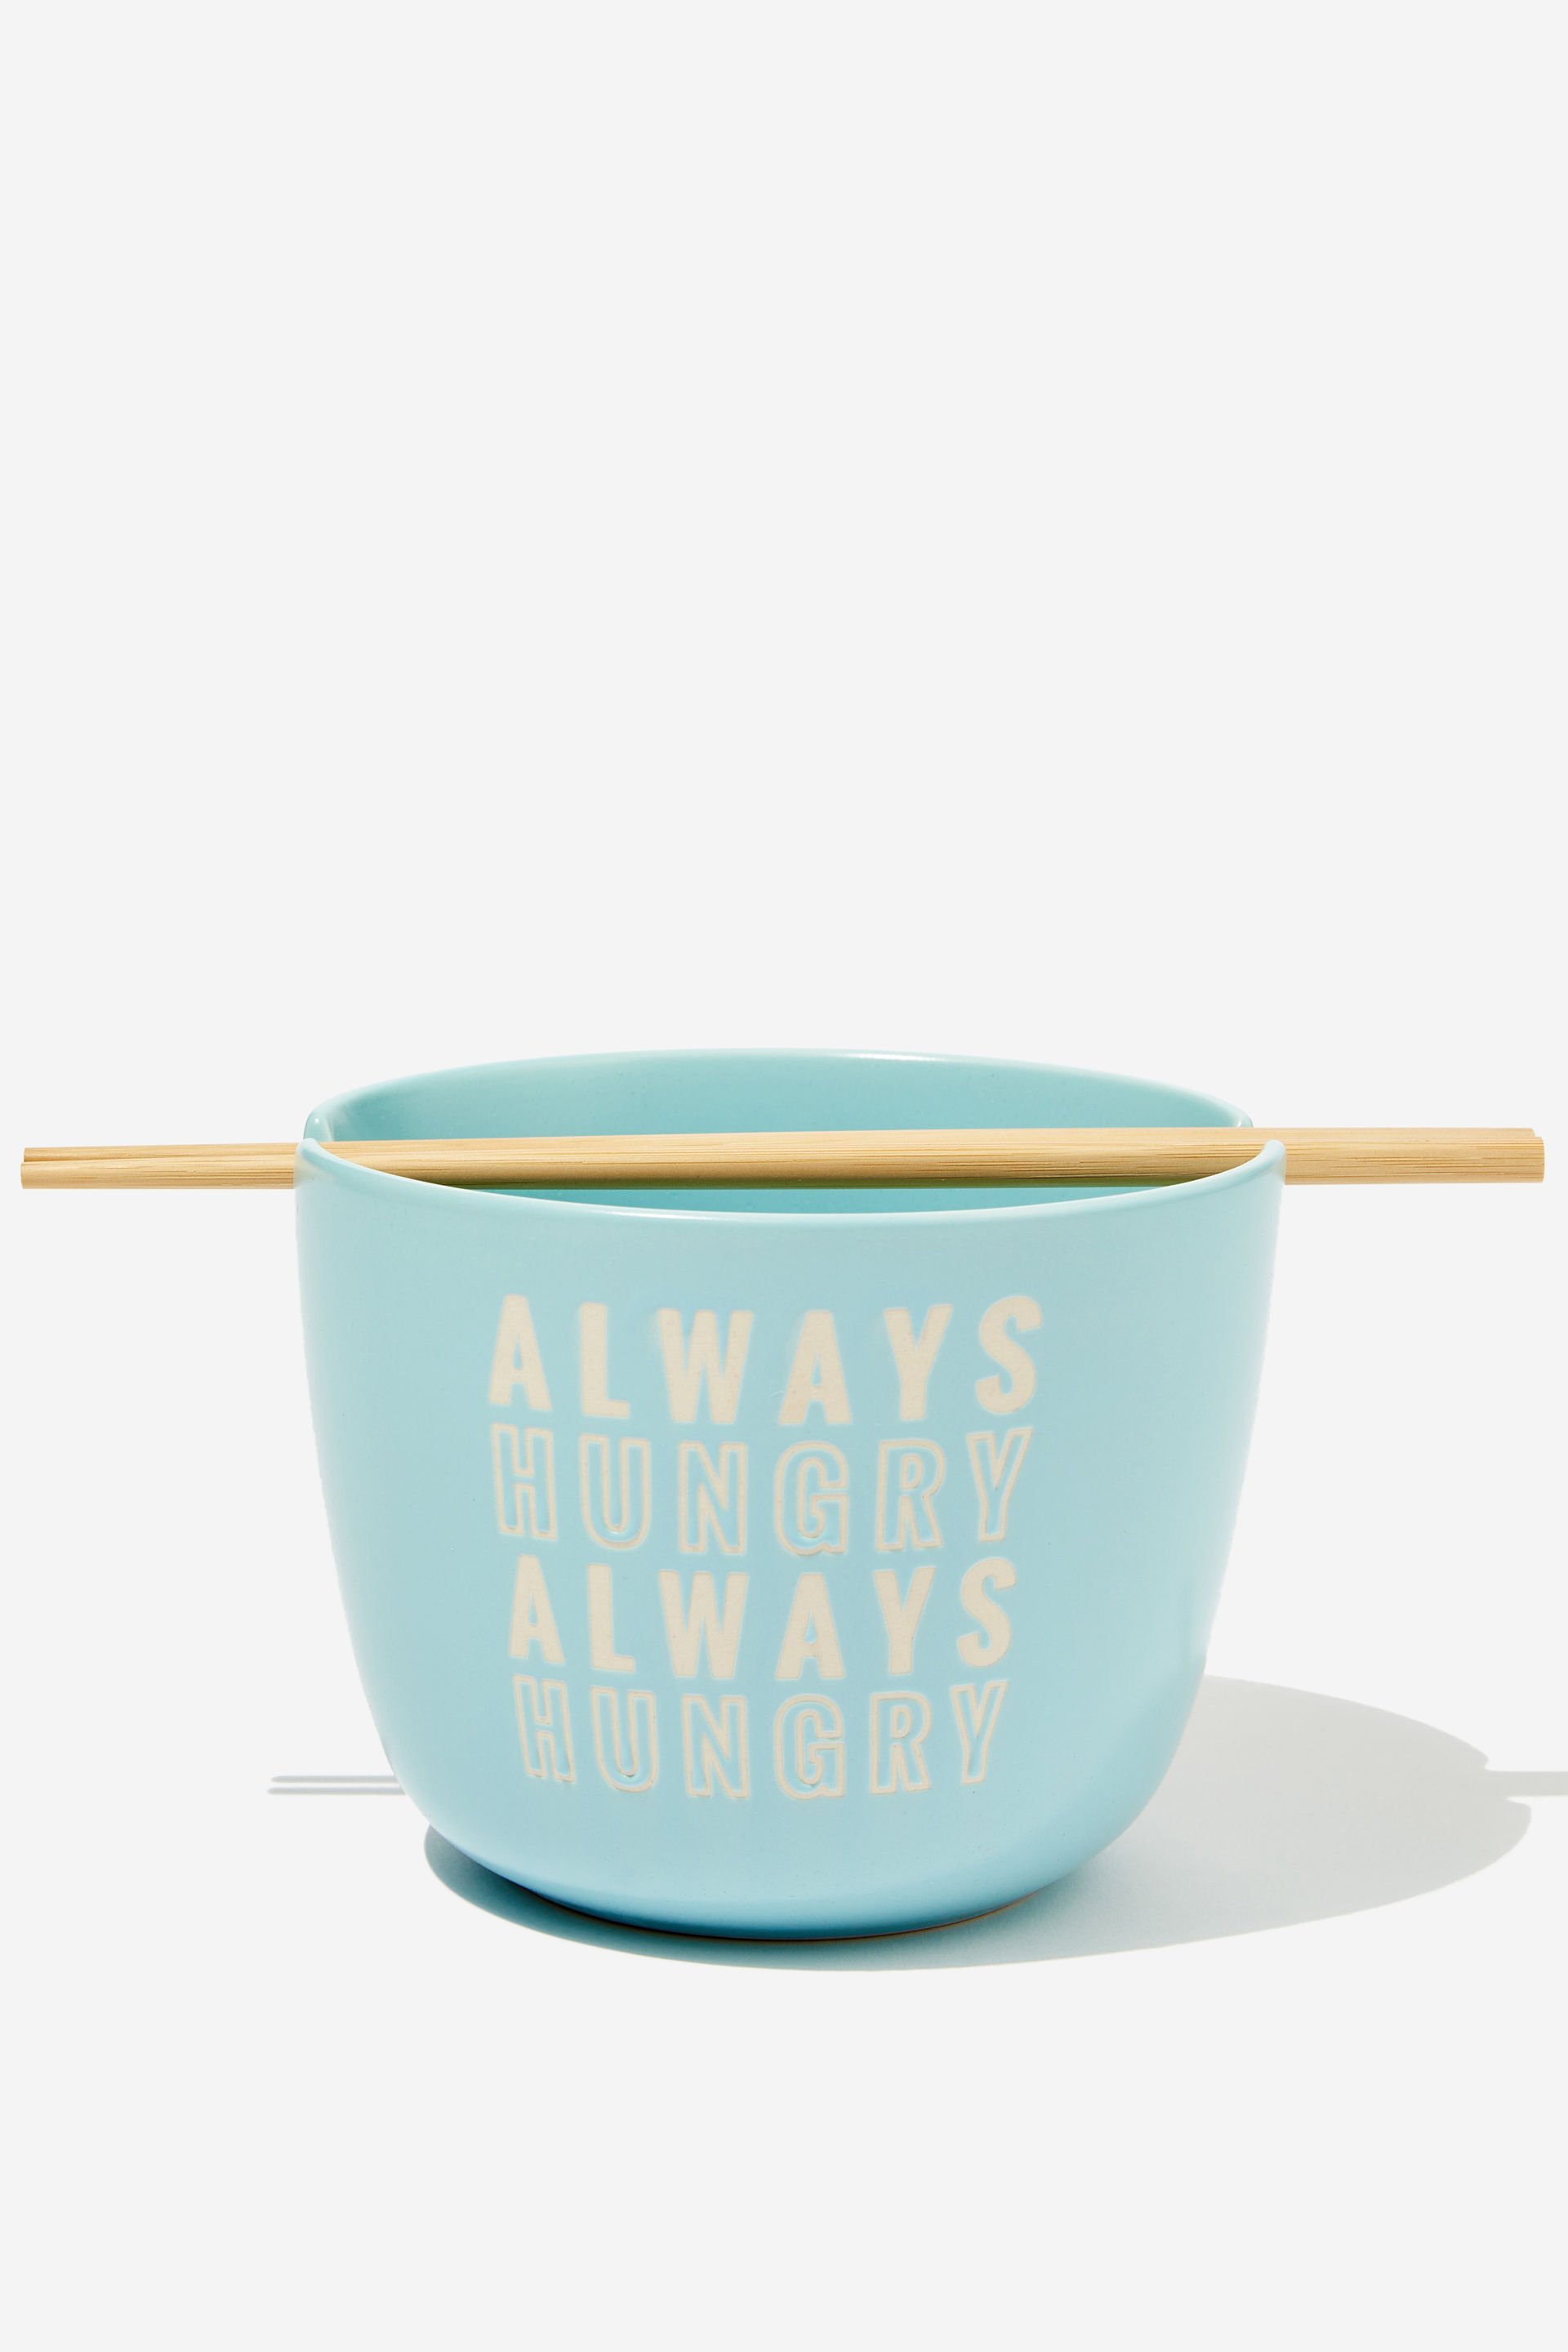 Typo - Feed Me Bowl - Always hungry always hungry arctic blue